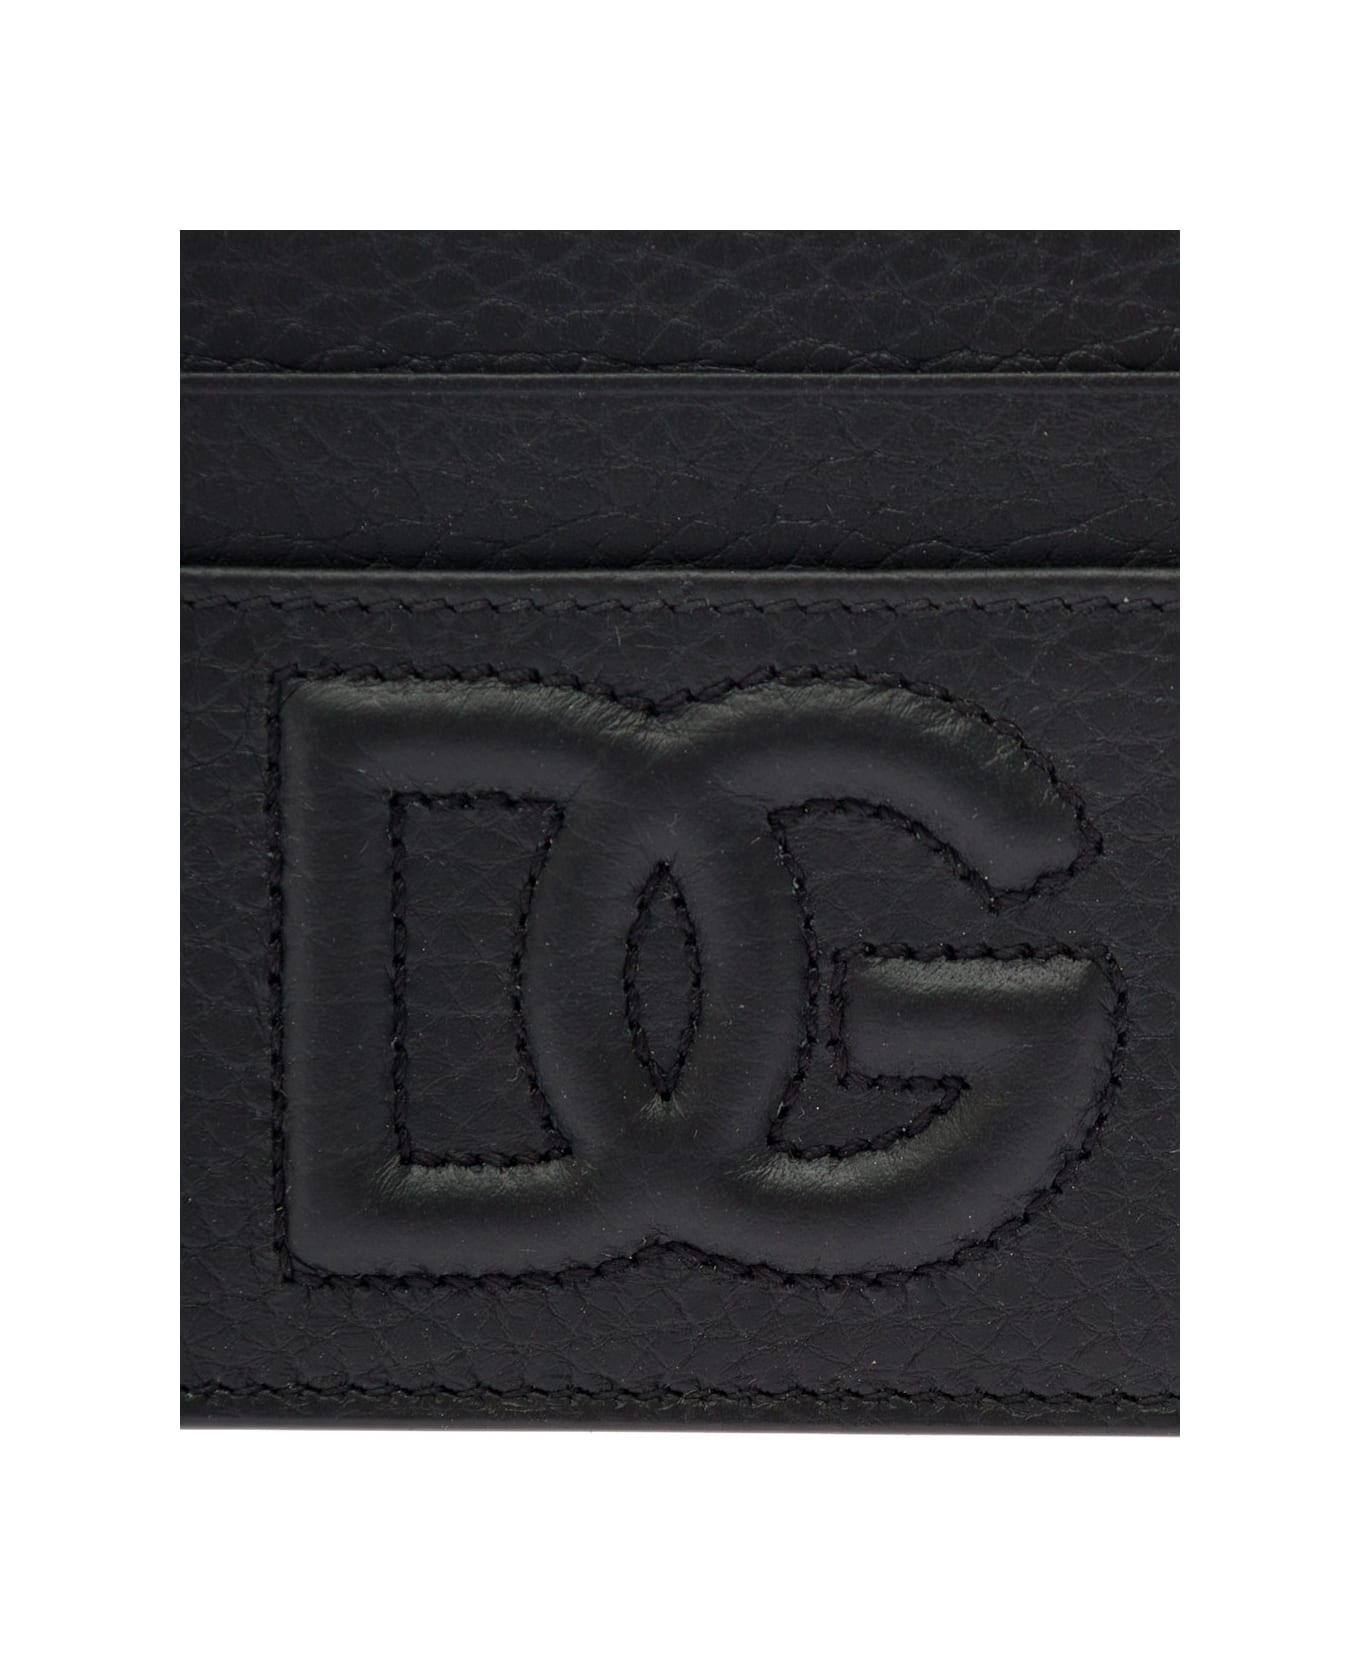 Dolce & Gabbana Black Card-holder With Quilted Logo In Leather Man - Black 財布